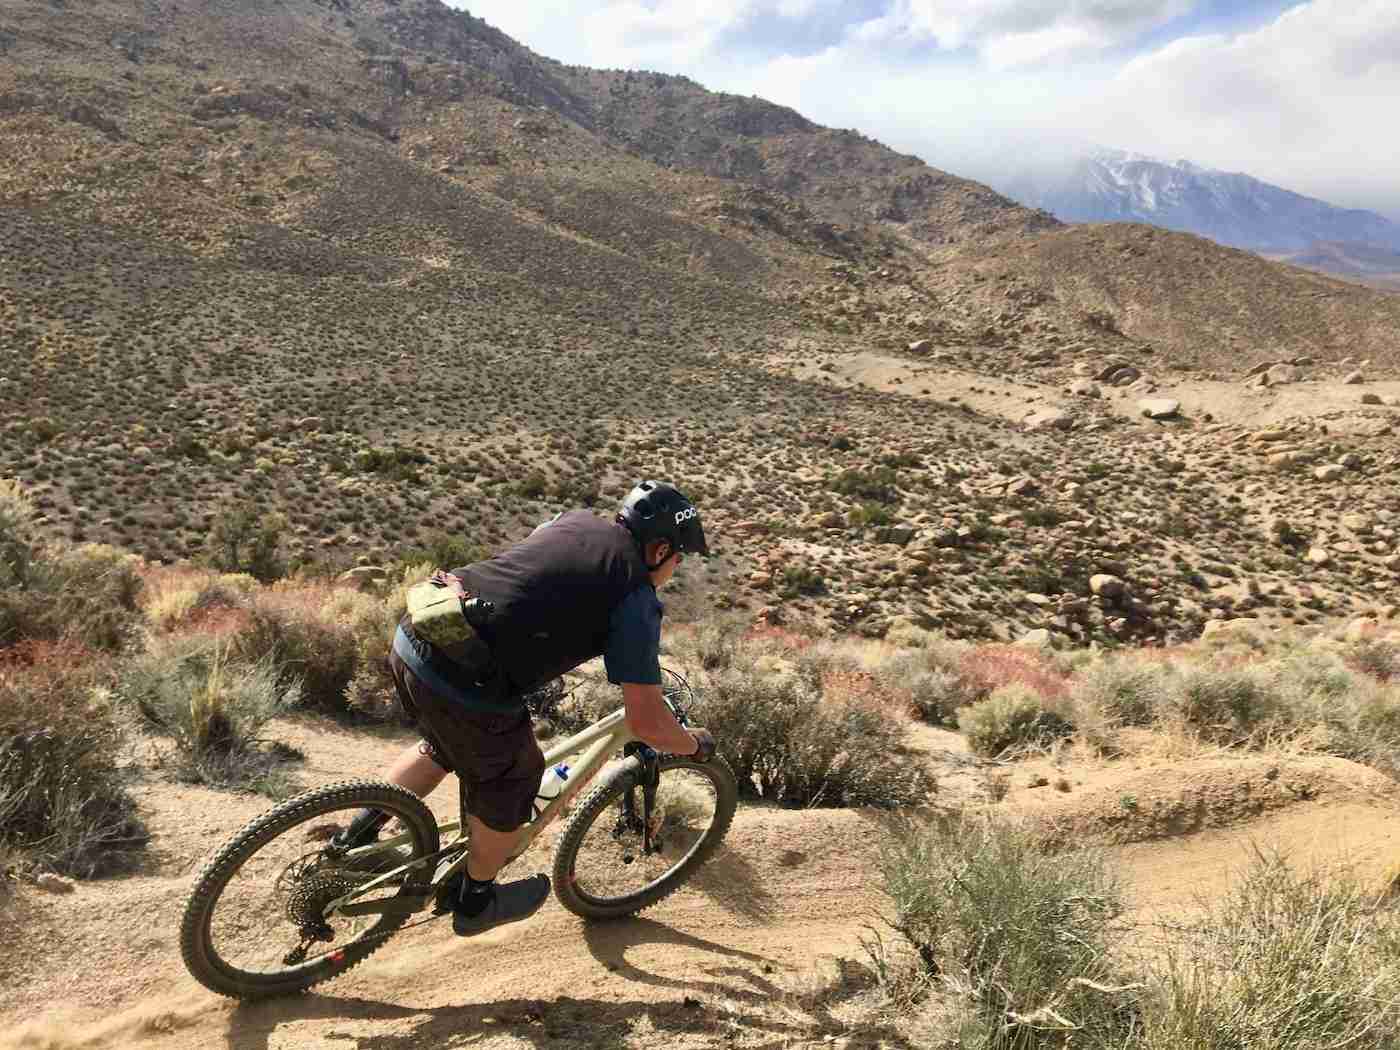 Check out the best mountain bike helmets and learn what key features to look for when choosing a noggin-protecting helmet for the trail.